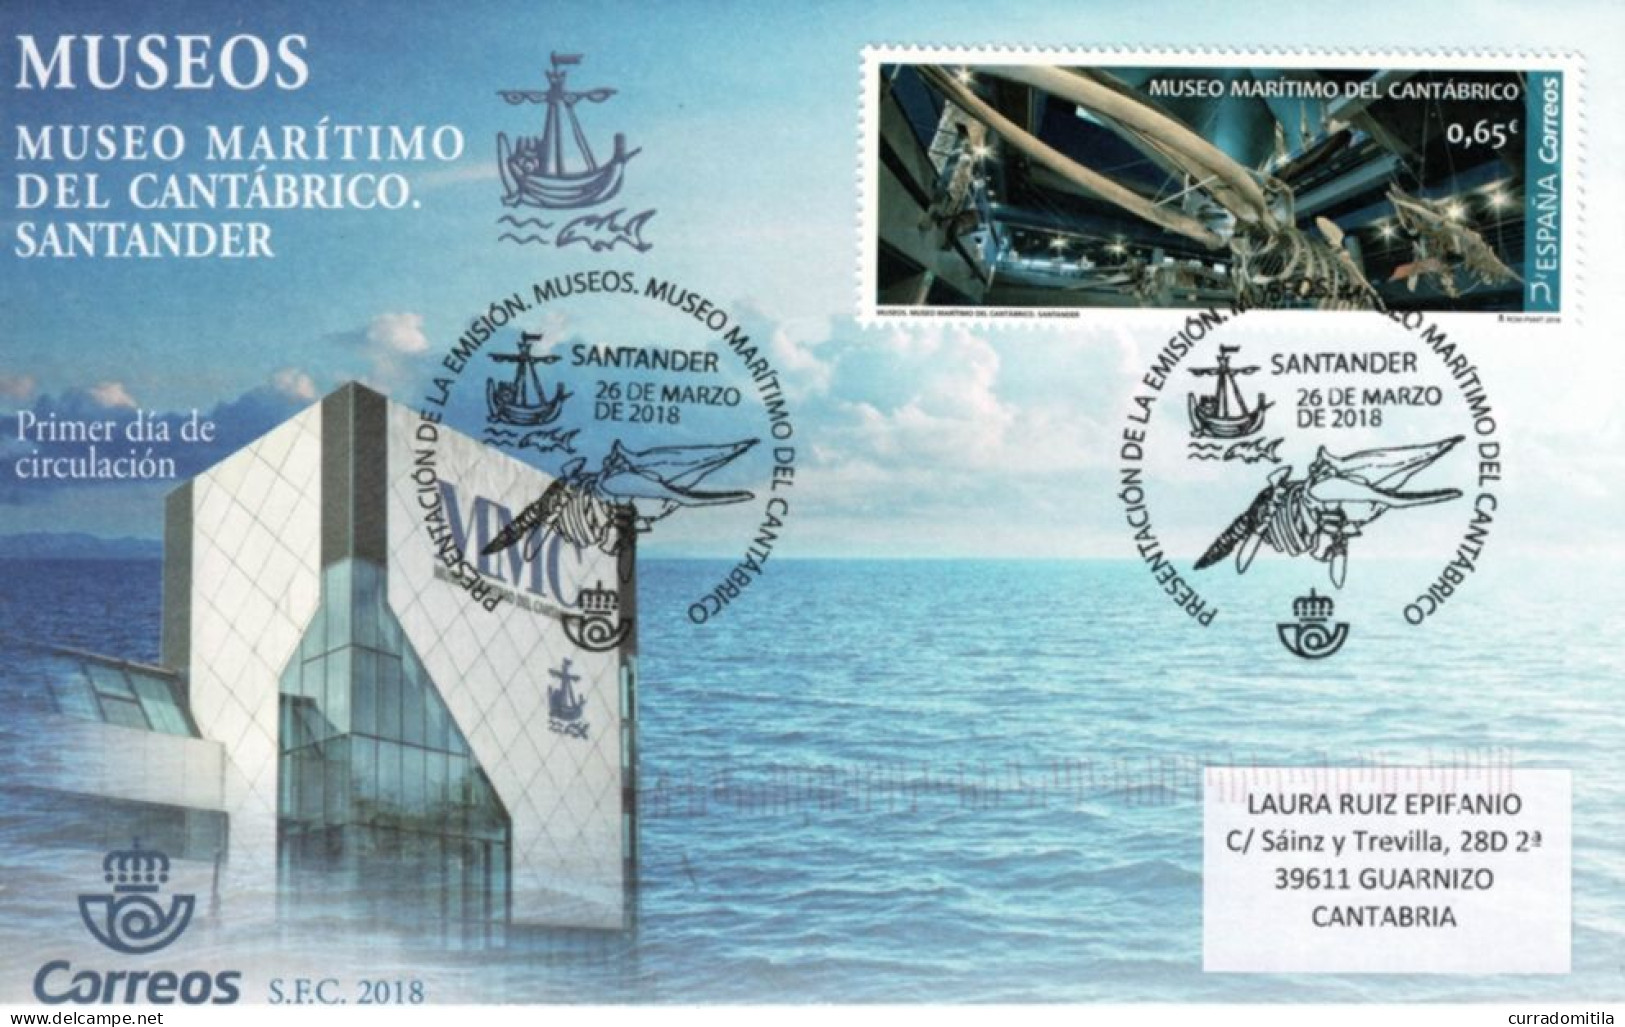 SPAIN. Circulated FDC From Santander With Maritime Museum Of Santander. Skeleton Of A Whale. Presentation Cachet - Wale